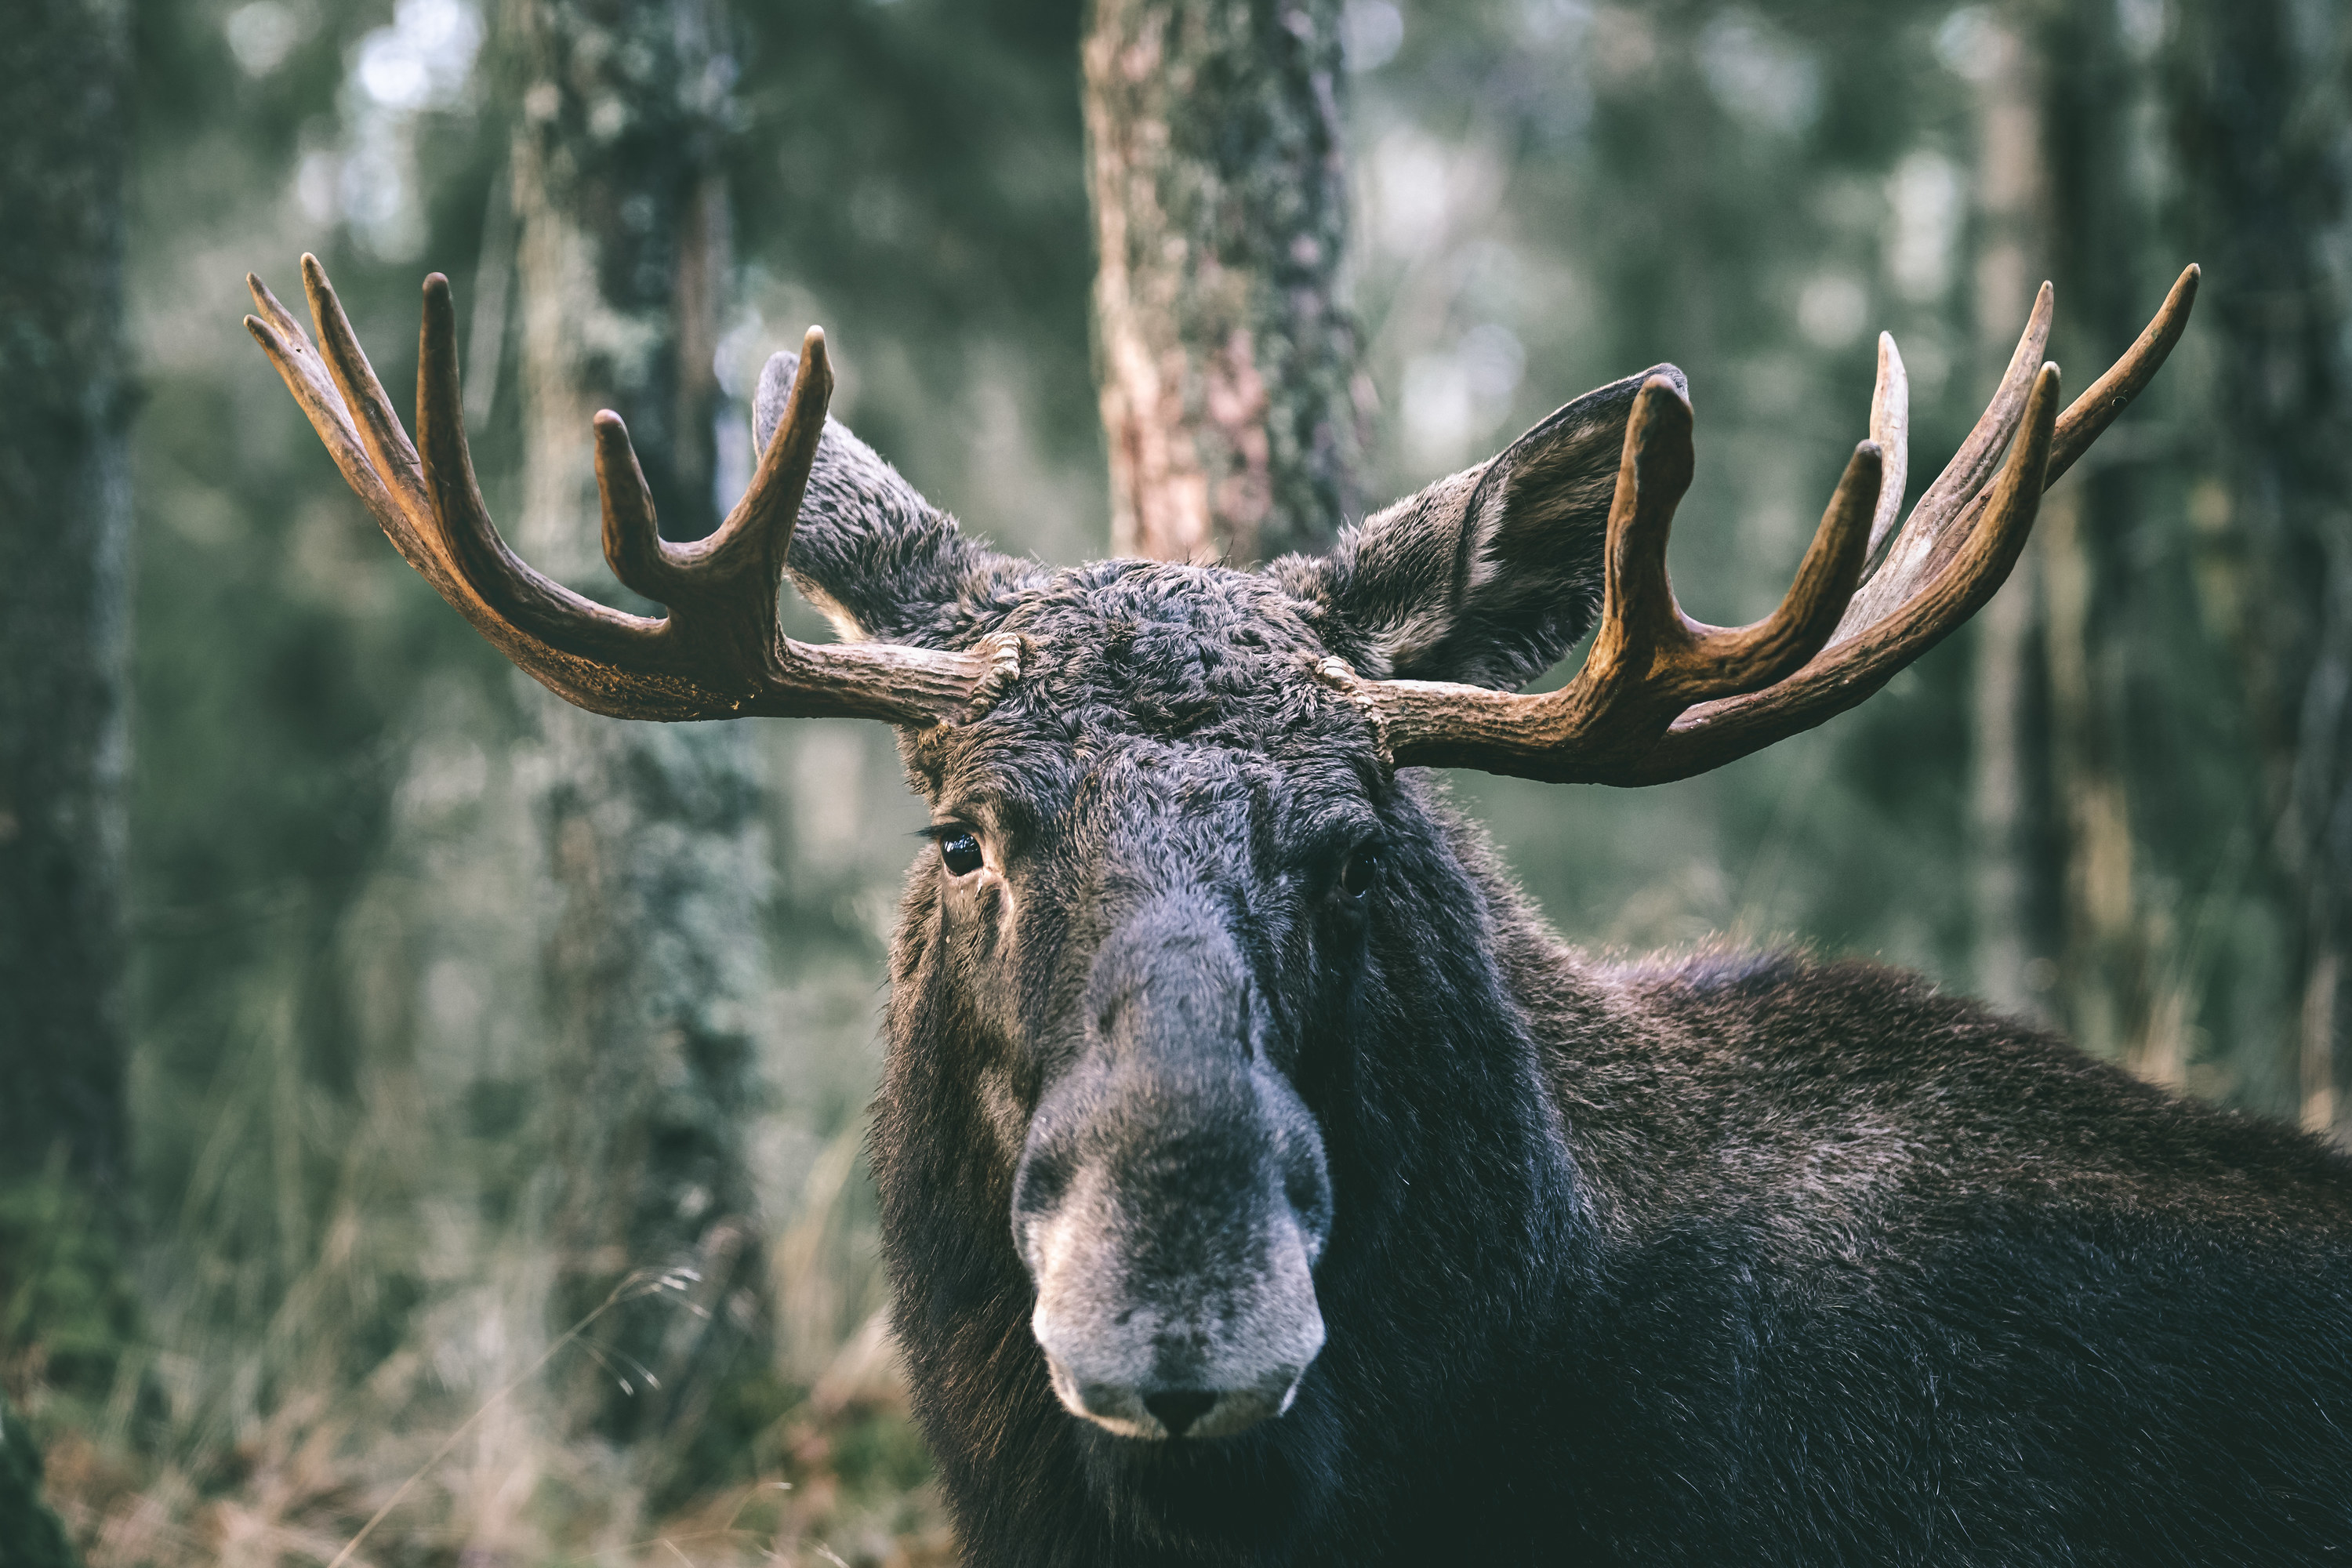 A head and shoulders image of a moose in the forest